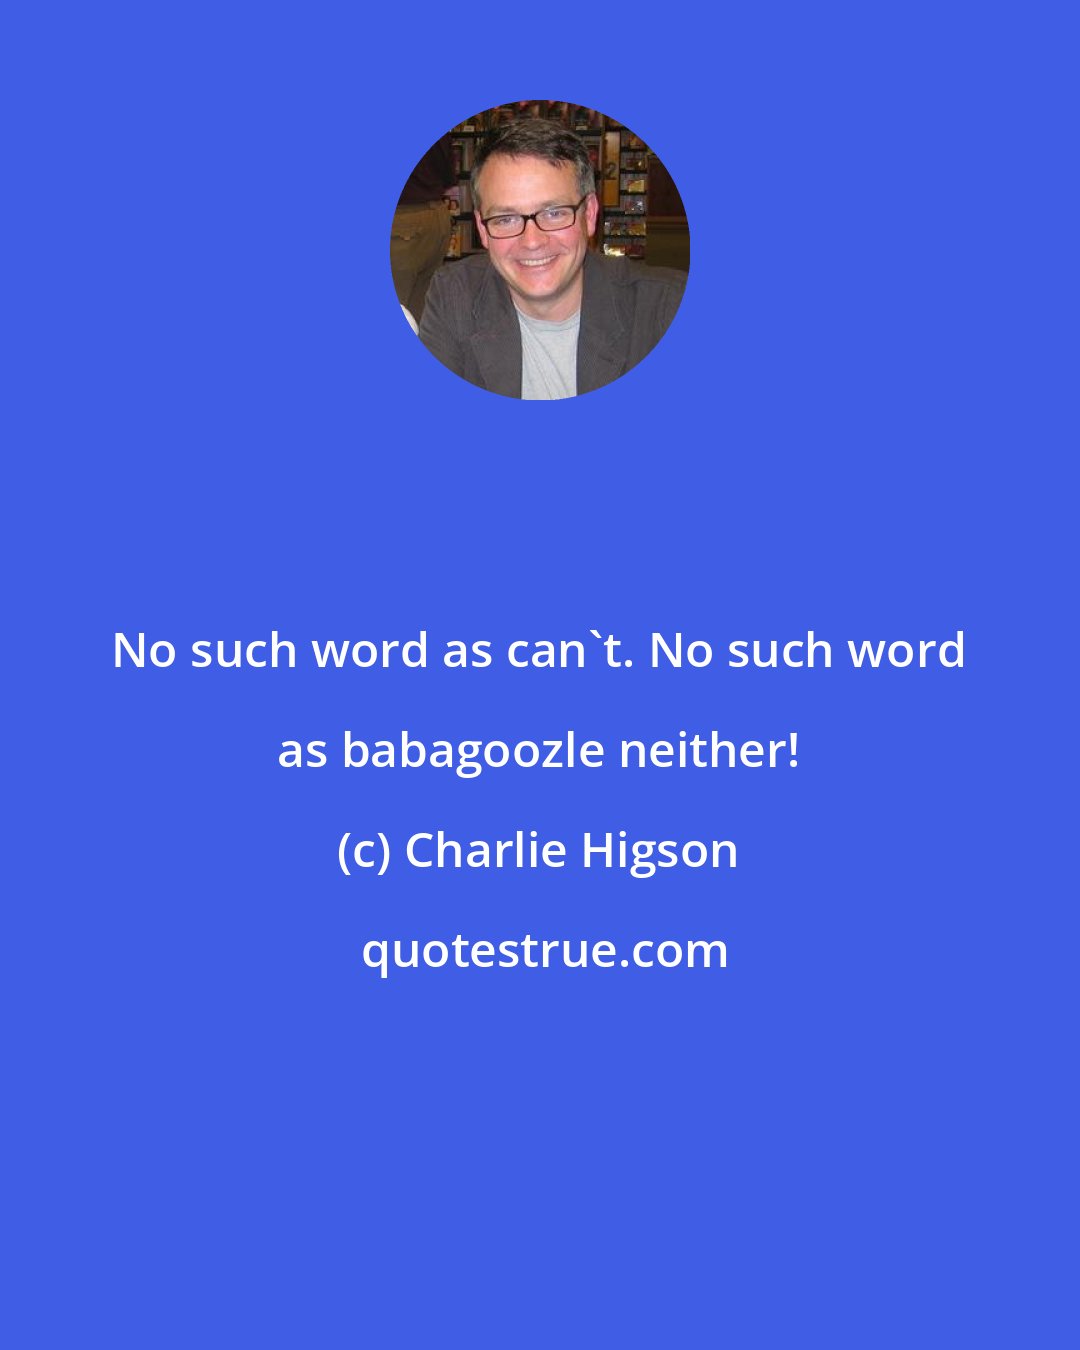 Charlie Higson: No such word as can't. No such word as babagoozle neither!